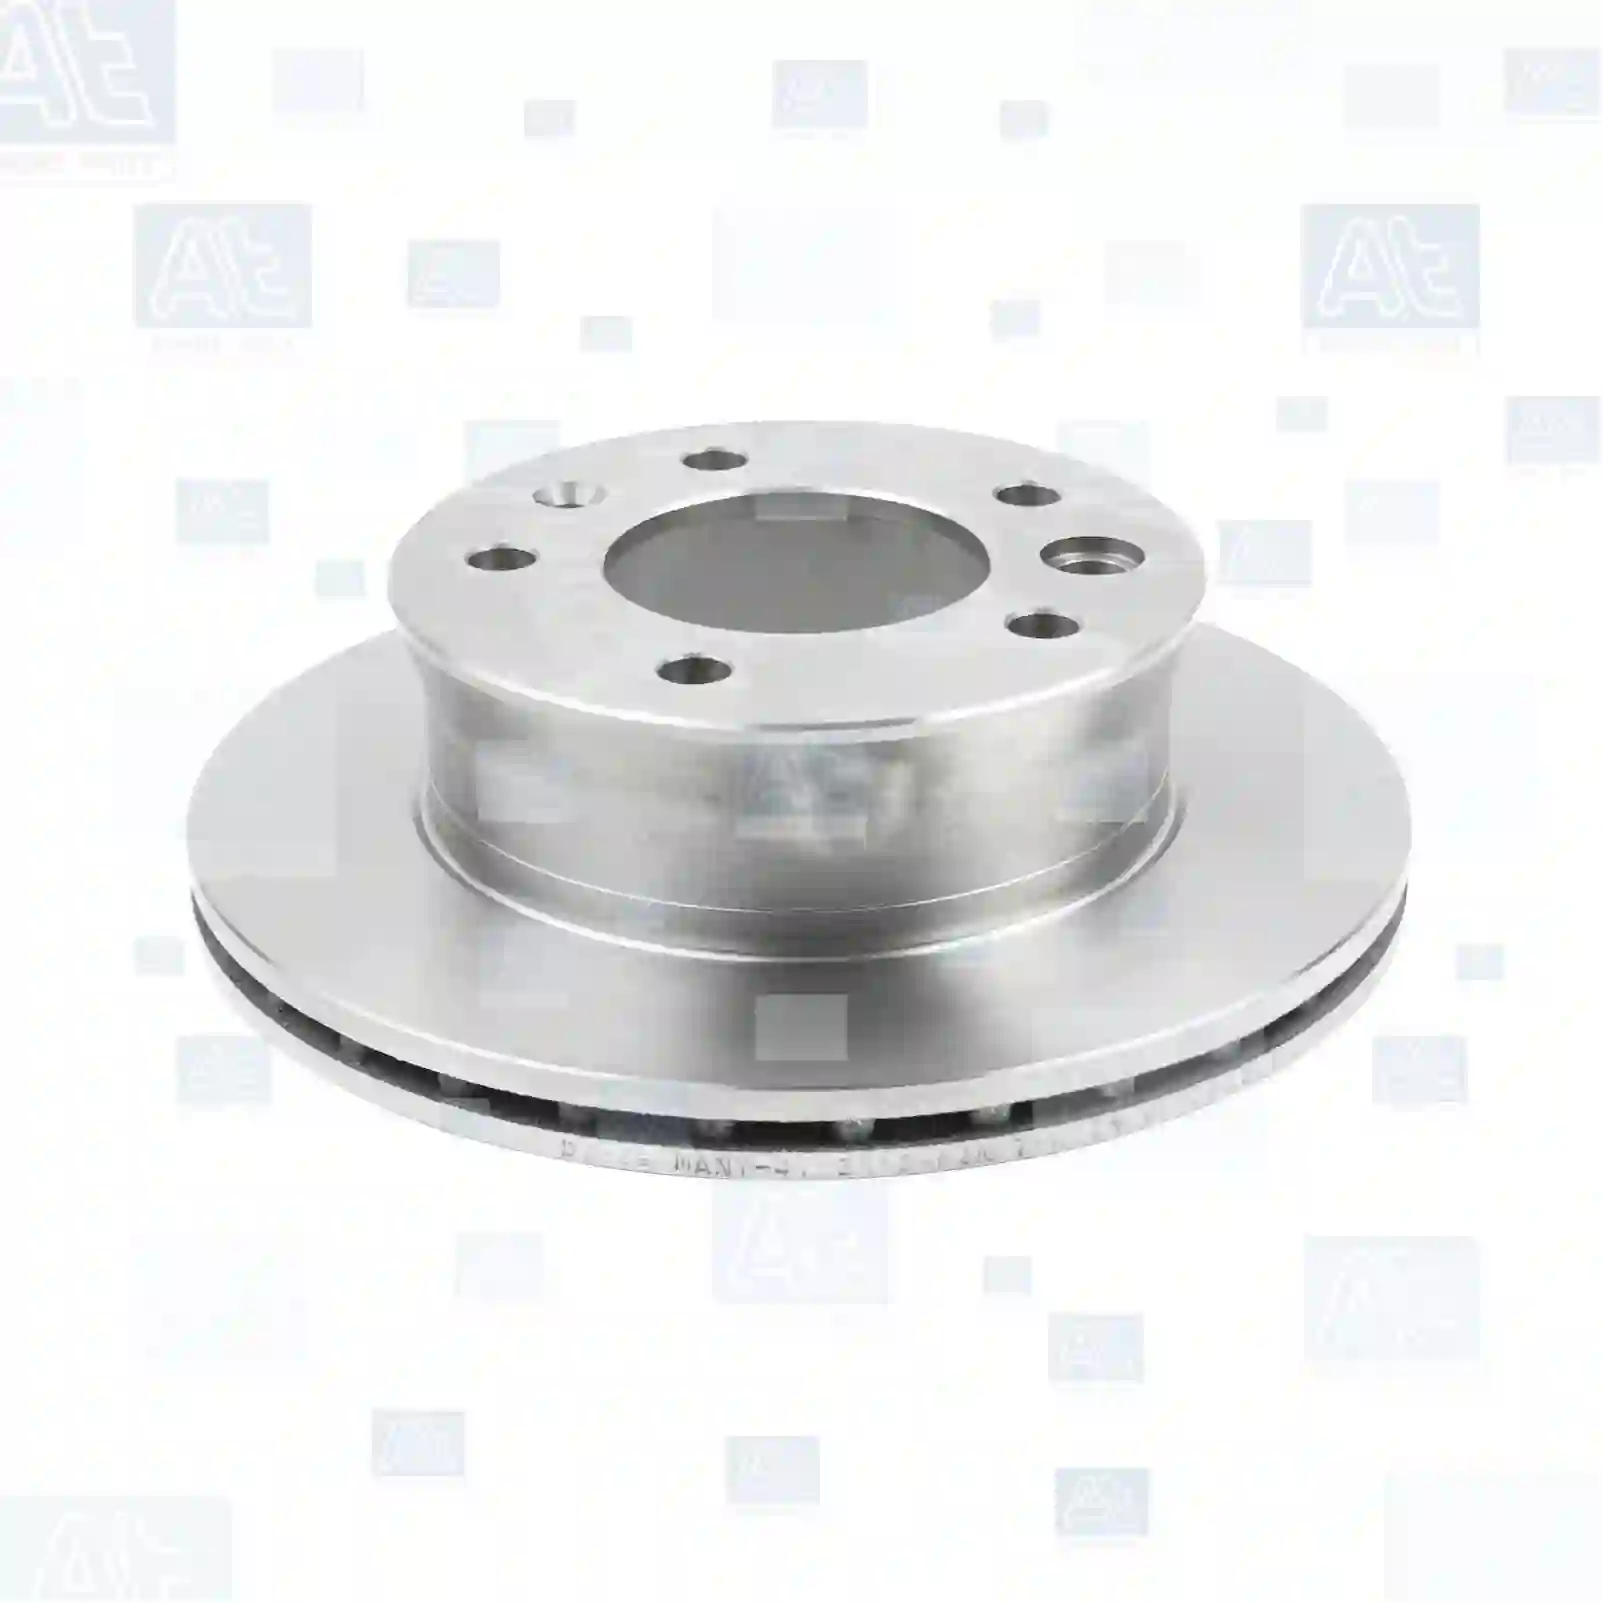 Brake disc, at no 77714777, oem no: 5103602AA, 5103602AB, 5104561AA, 5104561AB, K05104561AB, 5103602AA, 5103602AB, 5104561AA, 5104561AB, K05104561AB, 9014210312, 9014210412, 9014210612, 9024210312, 9024210412, 9024210612, 9024210712, 9024210912, 902421091210, 902421091211, 902421091204, 902421091211, 9214210312, 9214210612, 03000240002, 2D0615301A, 2D0615301A, 2D0407617, 2D0407617A, 2D0615301, 2D0615301A, 2D0615301B, 2D0615301C, 2D0615301D At Spare Part | Engine, Accelerator Pedal, Camshaft, Connecting Rod, Crankcase, Crankshaft, Cylinder Head, Engine Suspension Mountings, Exhaust Manifold, Exhaust Gas Recirculation, Filter Kits, Flywheel Housing, General Overhaul Kits, Engine, Intake Manifold, Oil Cleaner, Oil Cooler, Oil Filter, Oil Pump, Oil Sump, Piston & Liner, Sensor & Switch, Timing Case, Turbocharger, Cooling System, Belt Tensioner, Coolant Filter, Coolant Pipe, Corrosion Prevention Agent, Drive, Expansion Tank, Fan, Intercooler, Monitors & Gauges, Radiator, Thermostat, V-Belt / Timing belt, Water Pump, Fuel System, Electronical Injector Unit, Feed Pump, Fuel Filter, cpl., Fuel Gauge Sender,  Fuel Line, Fuel Pump, Fuel Tank, Injection Line Kit, Injection Pump, Exhaust System, Clutch & Pedal, Gearbox, Propeller Shaft, Axles, Brake System, Hubs & Wheels, Suspension, Leaf Spring, Universal Parts / Accessories, Steering, Electrical System, Cabin Brake disc, at no 77714777, oem no: 5103602AA, 5103602AB, 5104561AA, 5104561AB, K05104561AB, 5103602AA, 5103602AB, 5104561AA, 5104561AB, K05104561AB, 9014210312, 9014210412, 9014210612, 9024210312, 9024210412, 9024210612, 9024210712, 9024210912, 902421091210, 902421091211, 902421091204, 902421091211, 9214210312, 9214210612, 03000240002, 2D0615301A, 2D0615301A, 2D0407617, 2D0407617A, 2D0615301, 2D0615301A, 2D0615301B, 2D0615301C, 2D0615301D At Spare Part | Engine, Accelerator Pedal, Camshaft, Connecting Rod, Crankcase, Crankshaft, Cylinder Head, Engine Suspension Mountings, Exhaust Manifold, Exhaust Gas Recirculation, Filter Kits, Flywheel Housing, General Overhaul Kits, Engine, Intake Manifold, Oil Cleaner, Oil Cooler, Oil Filter, Oil Pump, Oil Sump, Piston & Liner, Sensor & Switch, Timing Case, Turbocharger, Cooling System, Belt Tensioner, Coolant Filter, Coolant Pipe, Corrosion Prevention Agent, Drive, Expansion Tank, Fan, Intercooler, Monitors & Gauges, Radiator, Thermostat, V-Belt / Timing belt, Water Pump, Fuel System, Electronical Injector Unit, Feed Pump, Fuel Filter, cpl., Fuel Gauge Sender,  Fuel Line, Fuel Pump, Fuel Tank, Injection Line Kit, Injection Pump, Exhaust System, Clutch & Pedal, Gearbox, Propeller Shaft, Axles, Brake System, Hubs & Wheels, Suspension, Leaf Spring, Universal Parts / Accessories, Steering, Electrical System, Cabin